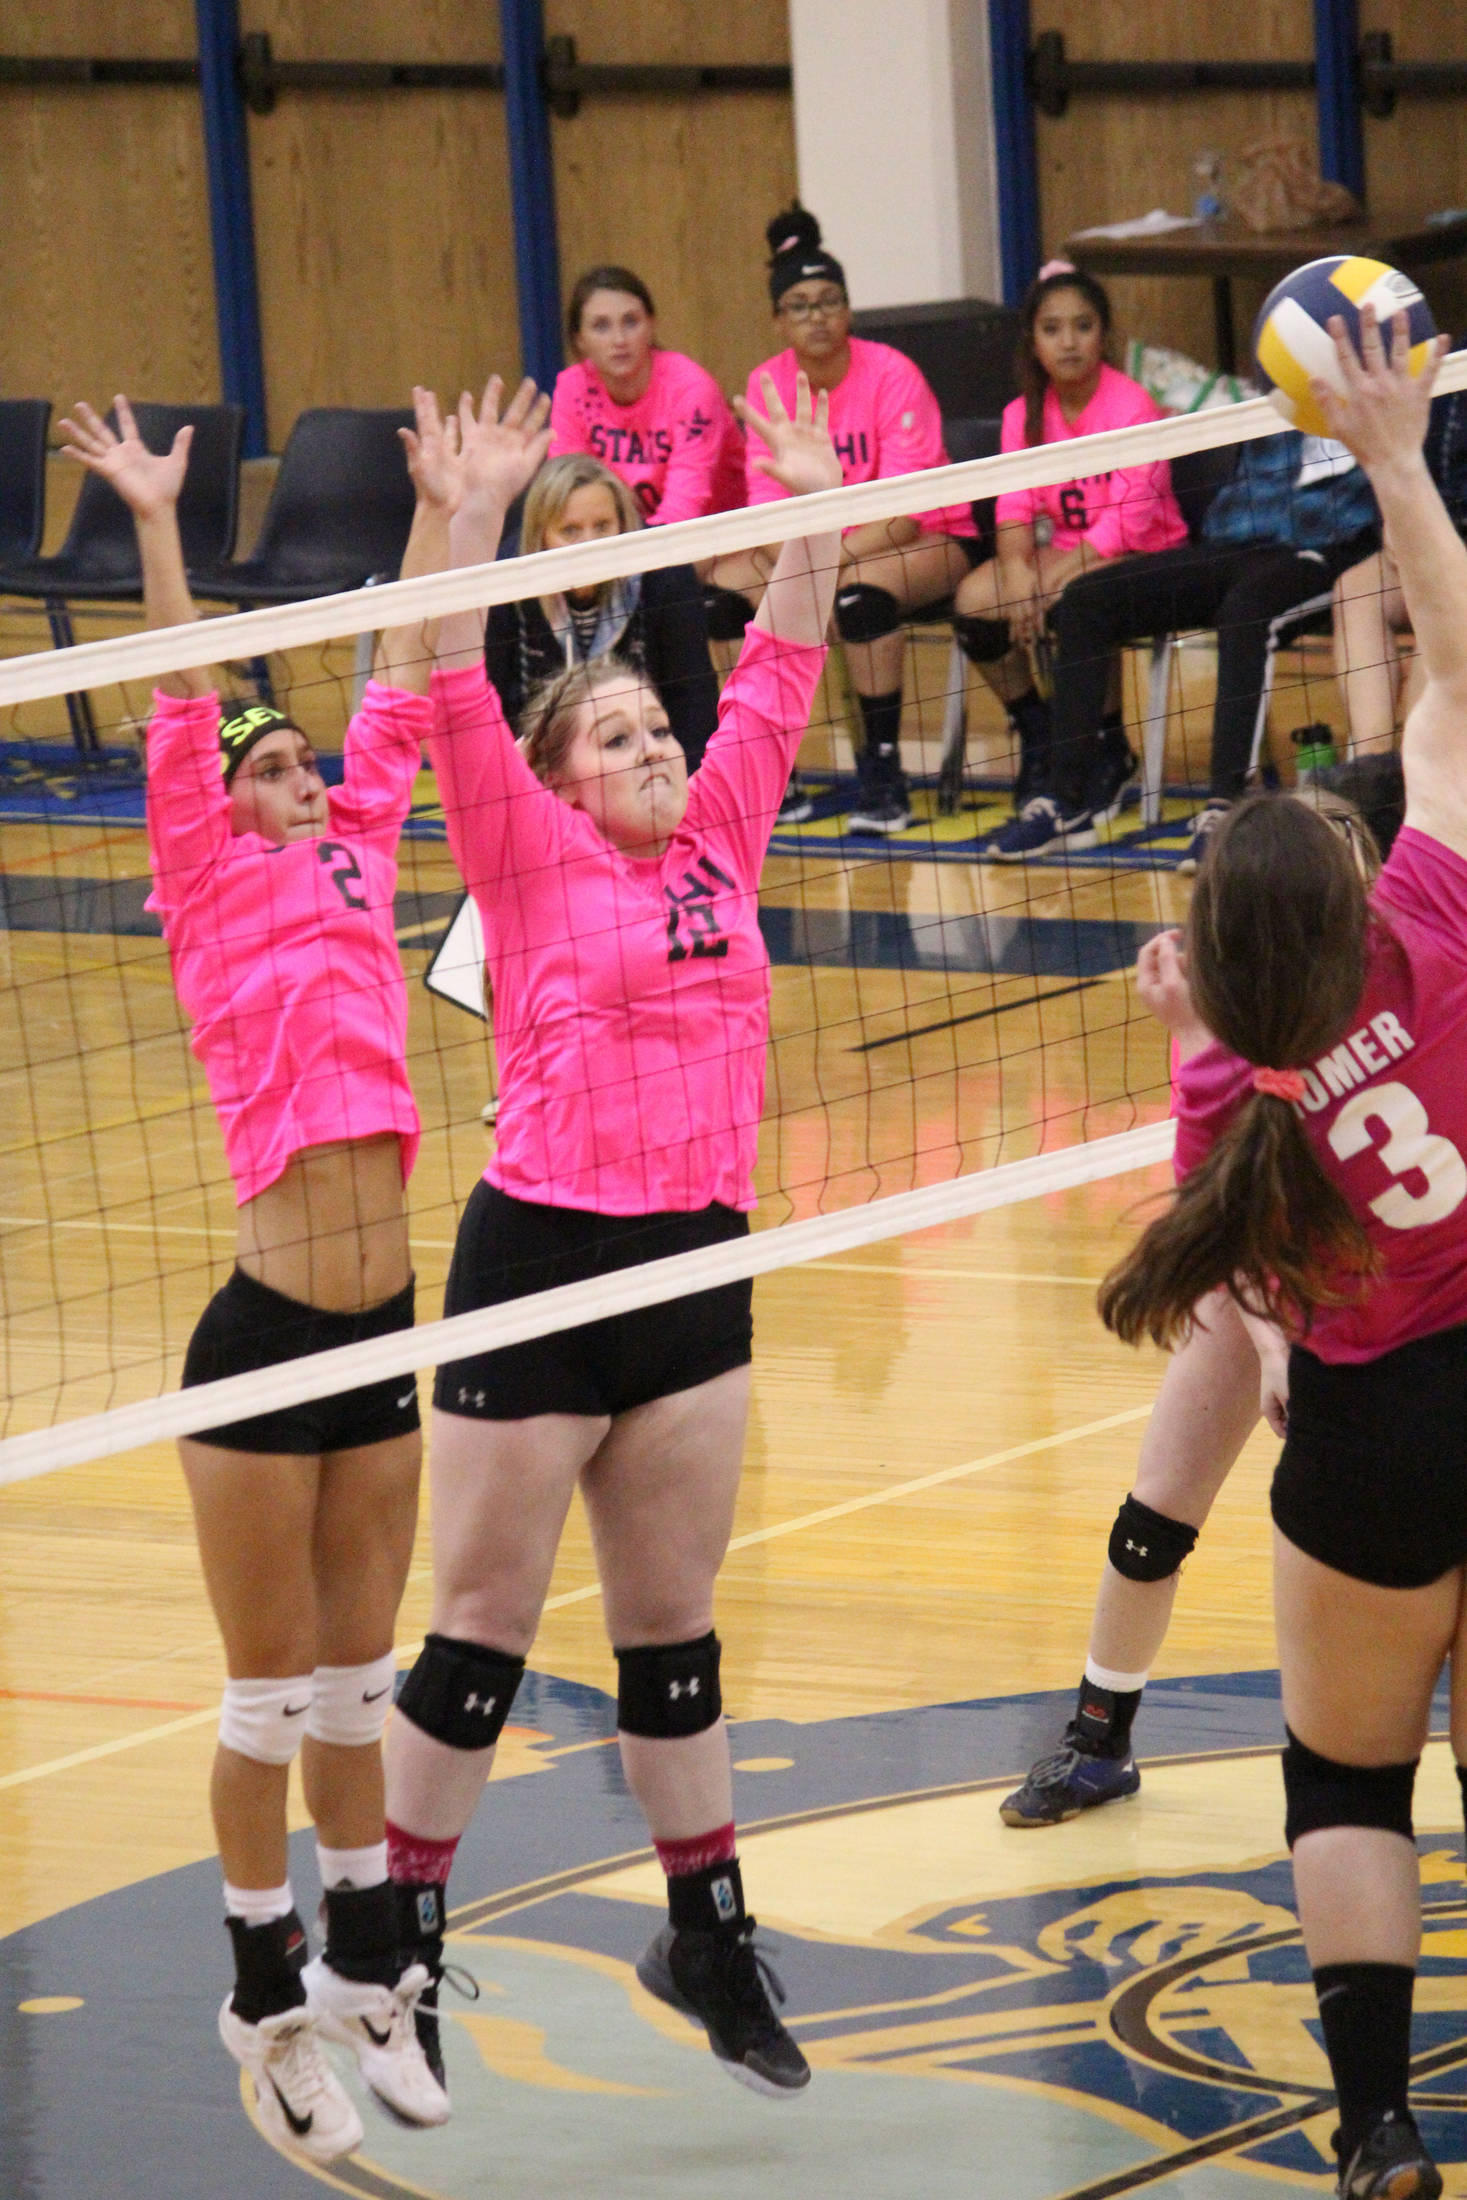 Soldotna High School’s Carsen Brown (left) and Bailey Leach (right) jump to block a spike from Homer’s Tonda Smude during their game Tuesday, Oct. 9, 2018 at the Alice Witte Gymnasium in Homer, Alaska. (Photo by Megan Pacer/Homer News)